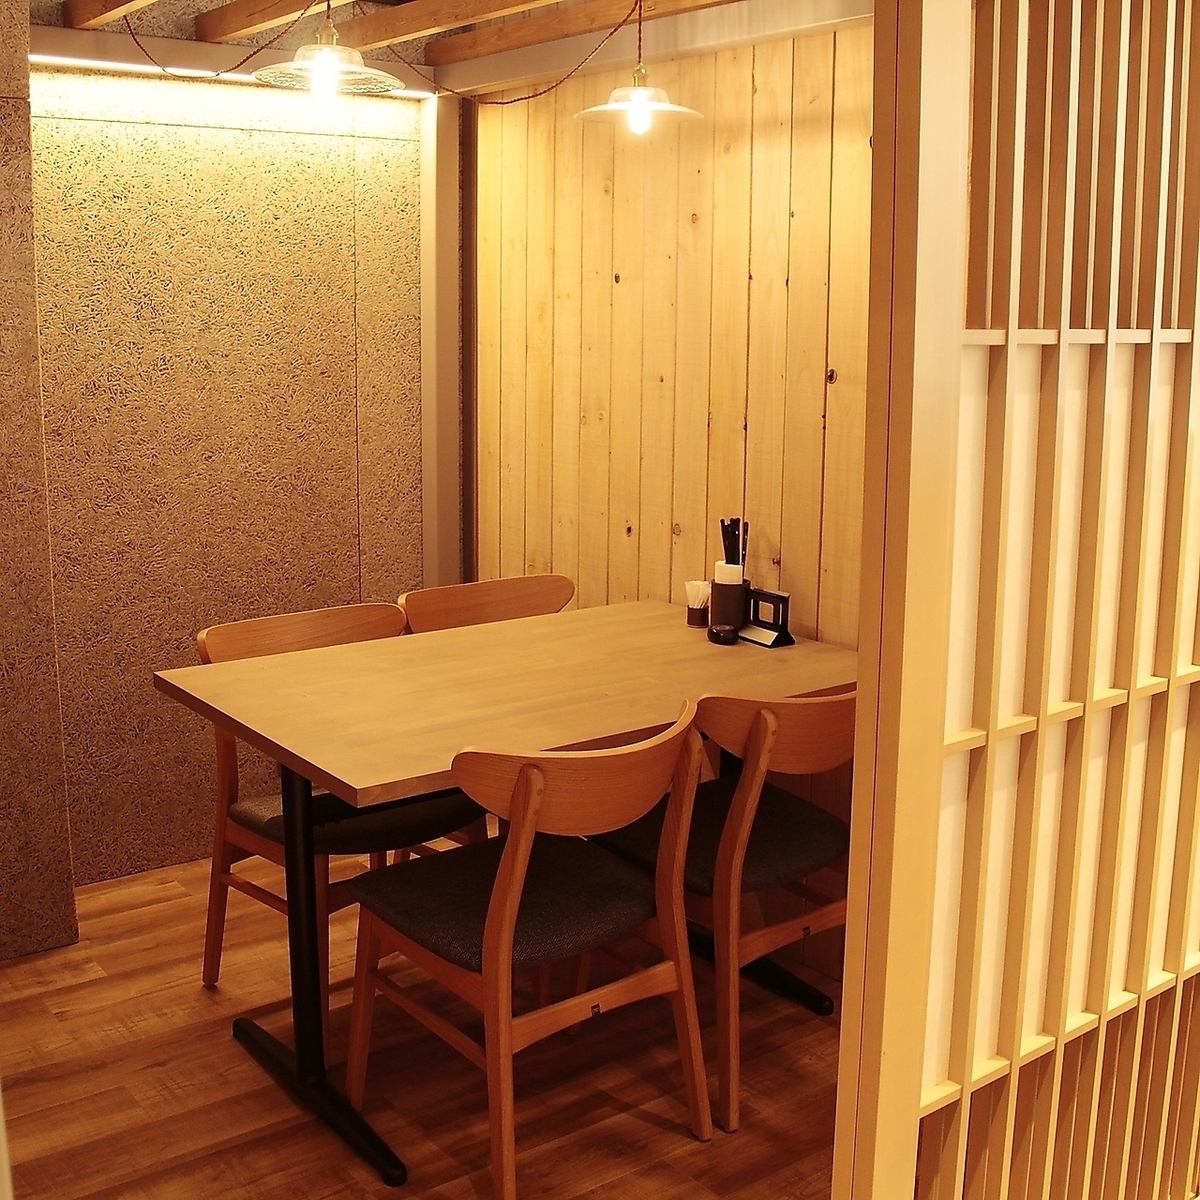 Recommended for all kinds of banquets! A private room with a sunken kotatsu that can accommodate up to 40 people.